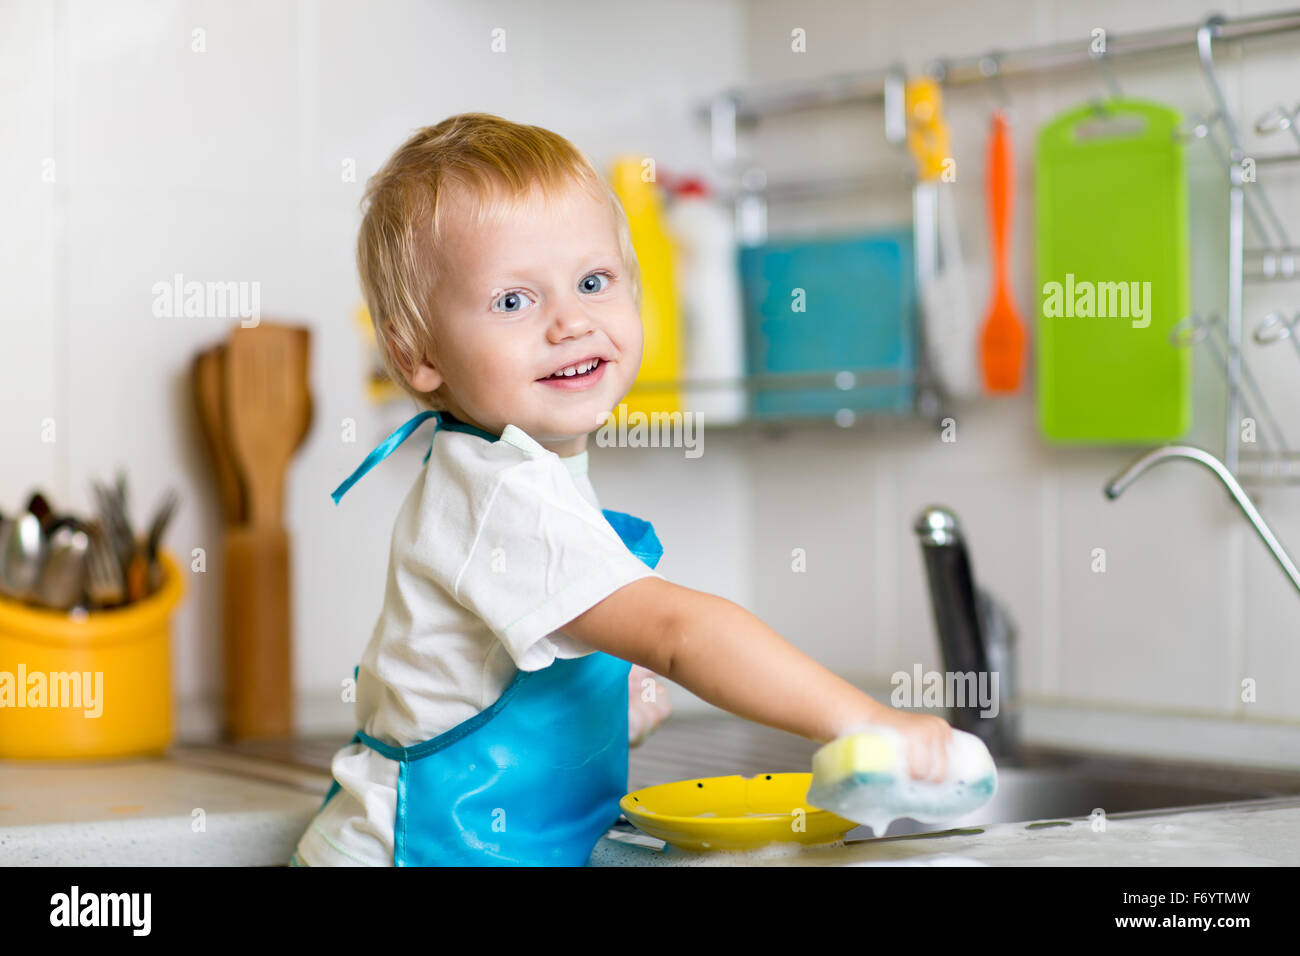 Toddler child washing dishes in kitchen. Little boy having fun with helping to his mother with housework. Stock Photo